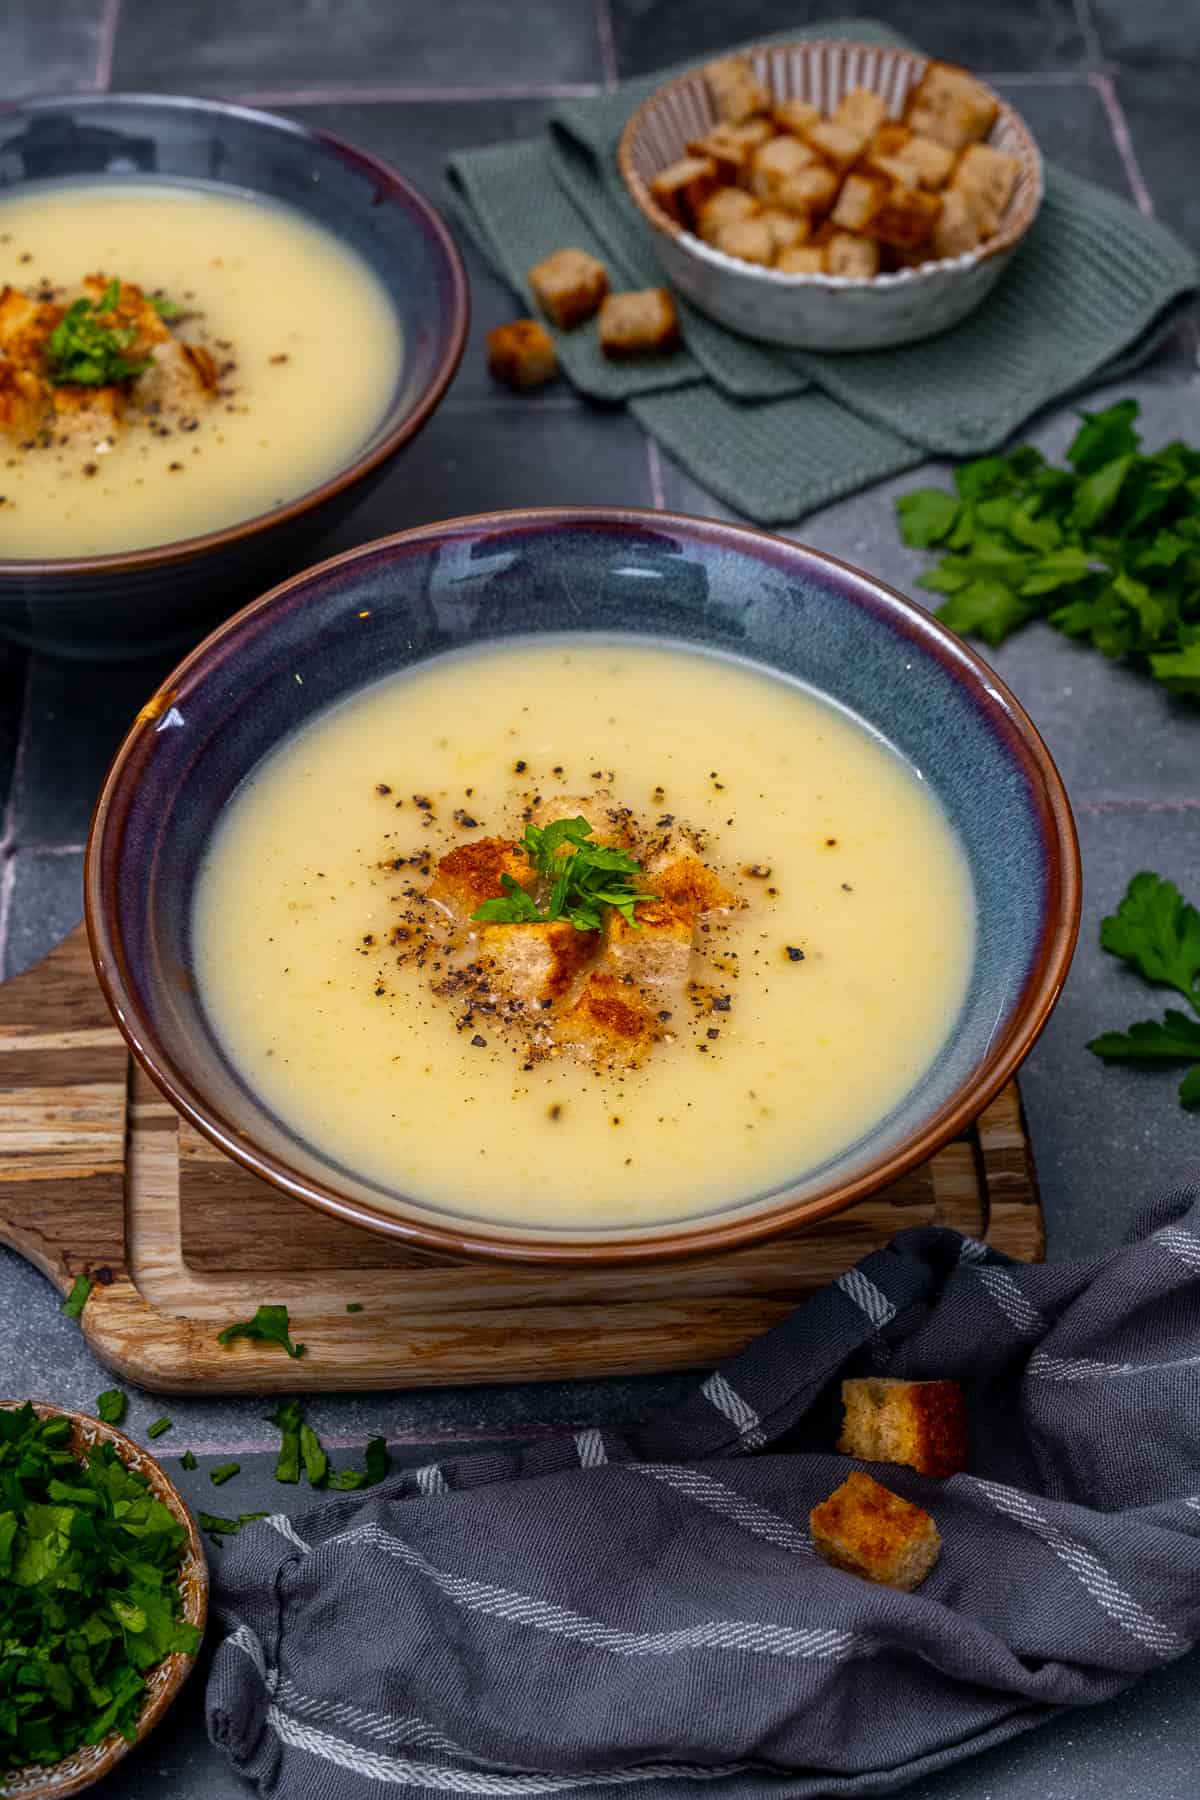 Jerusalem artichoke soup topped with croutons, parsley and pepper in a bluish bowl.